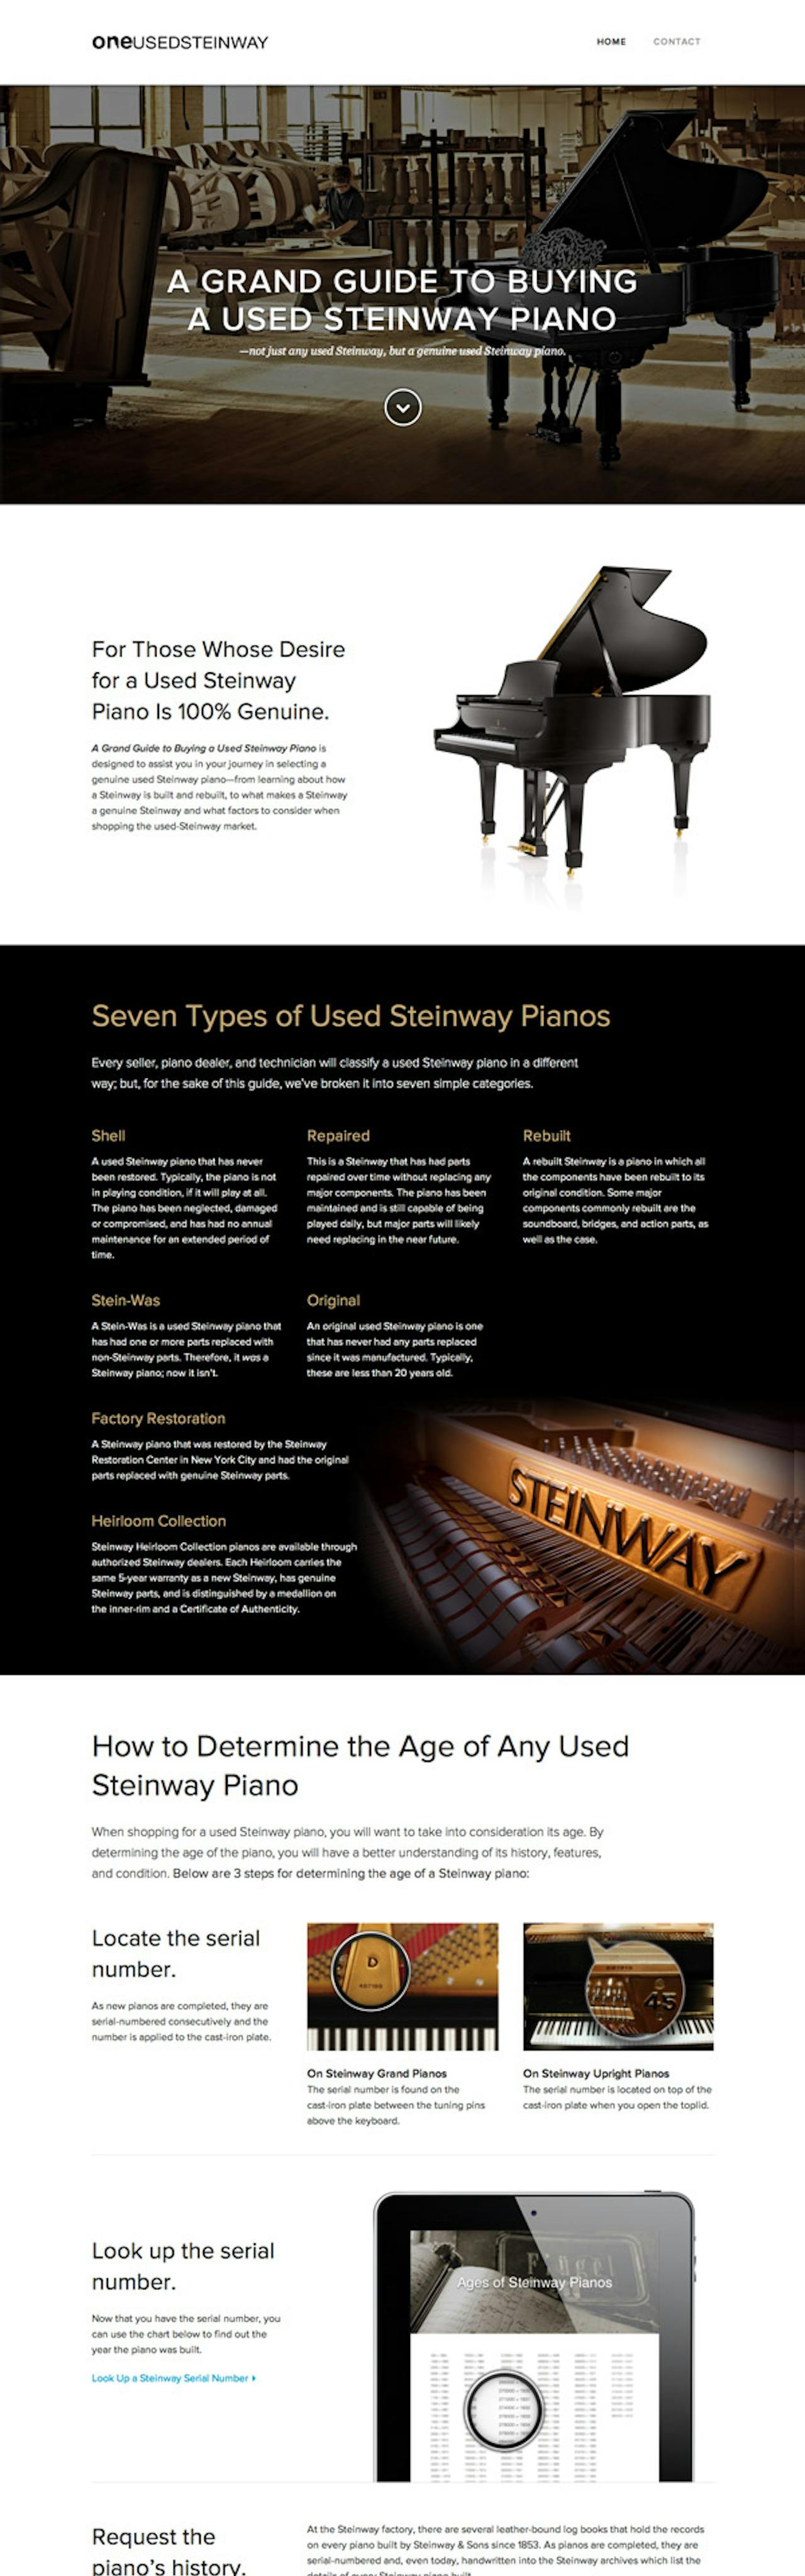 A Grand Guide to Buying a Used Steinway Website Screenshot